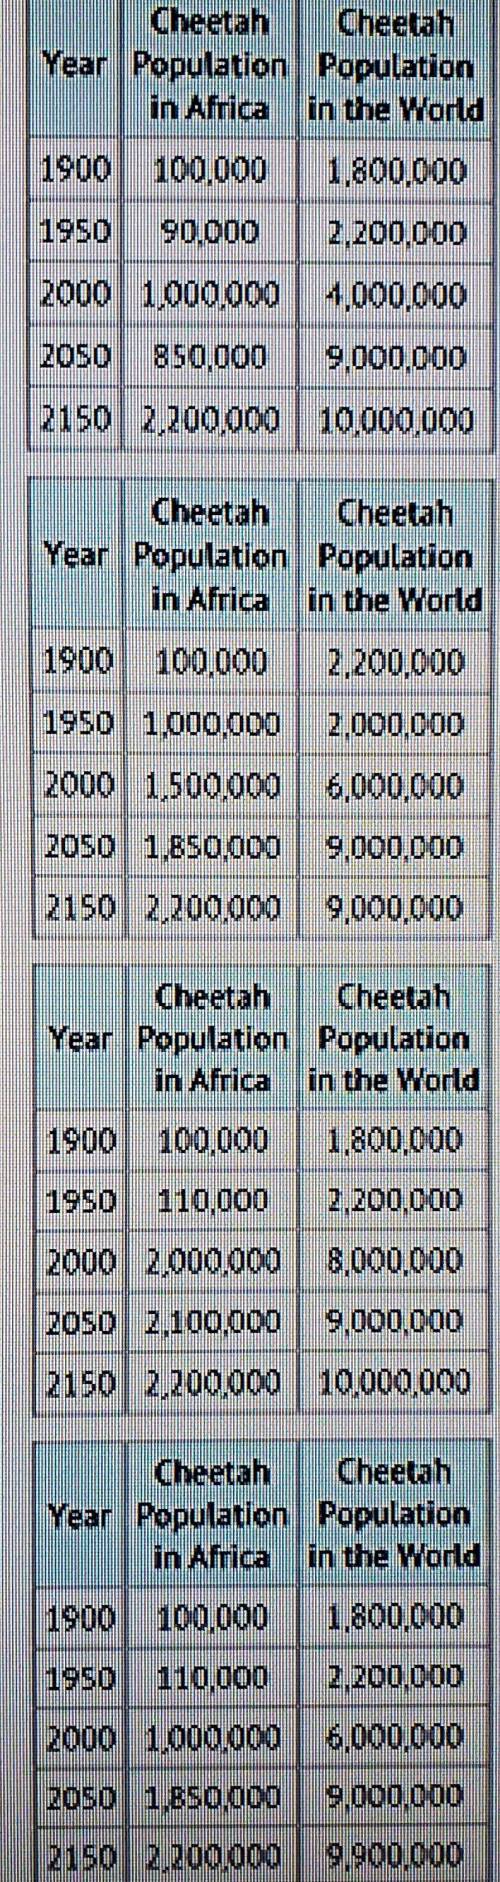 Please help ASAP

This bar graph shows the cheetah population of Africa and the world in the past